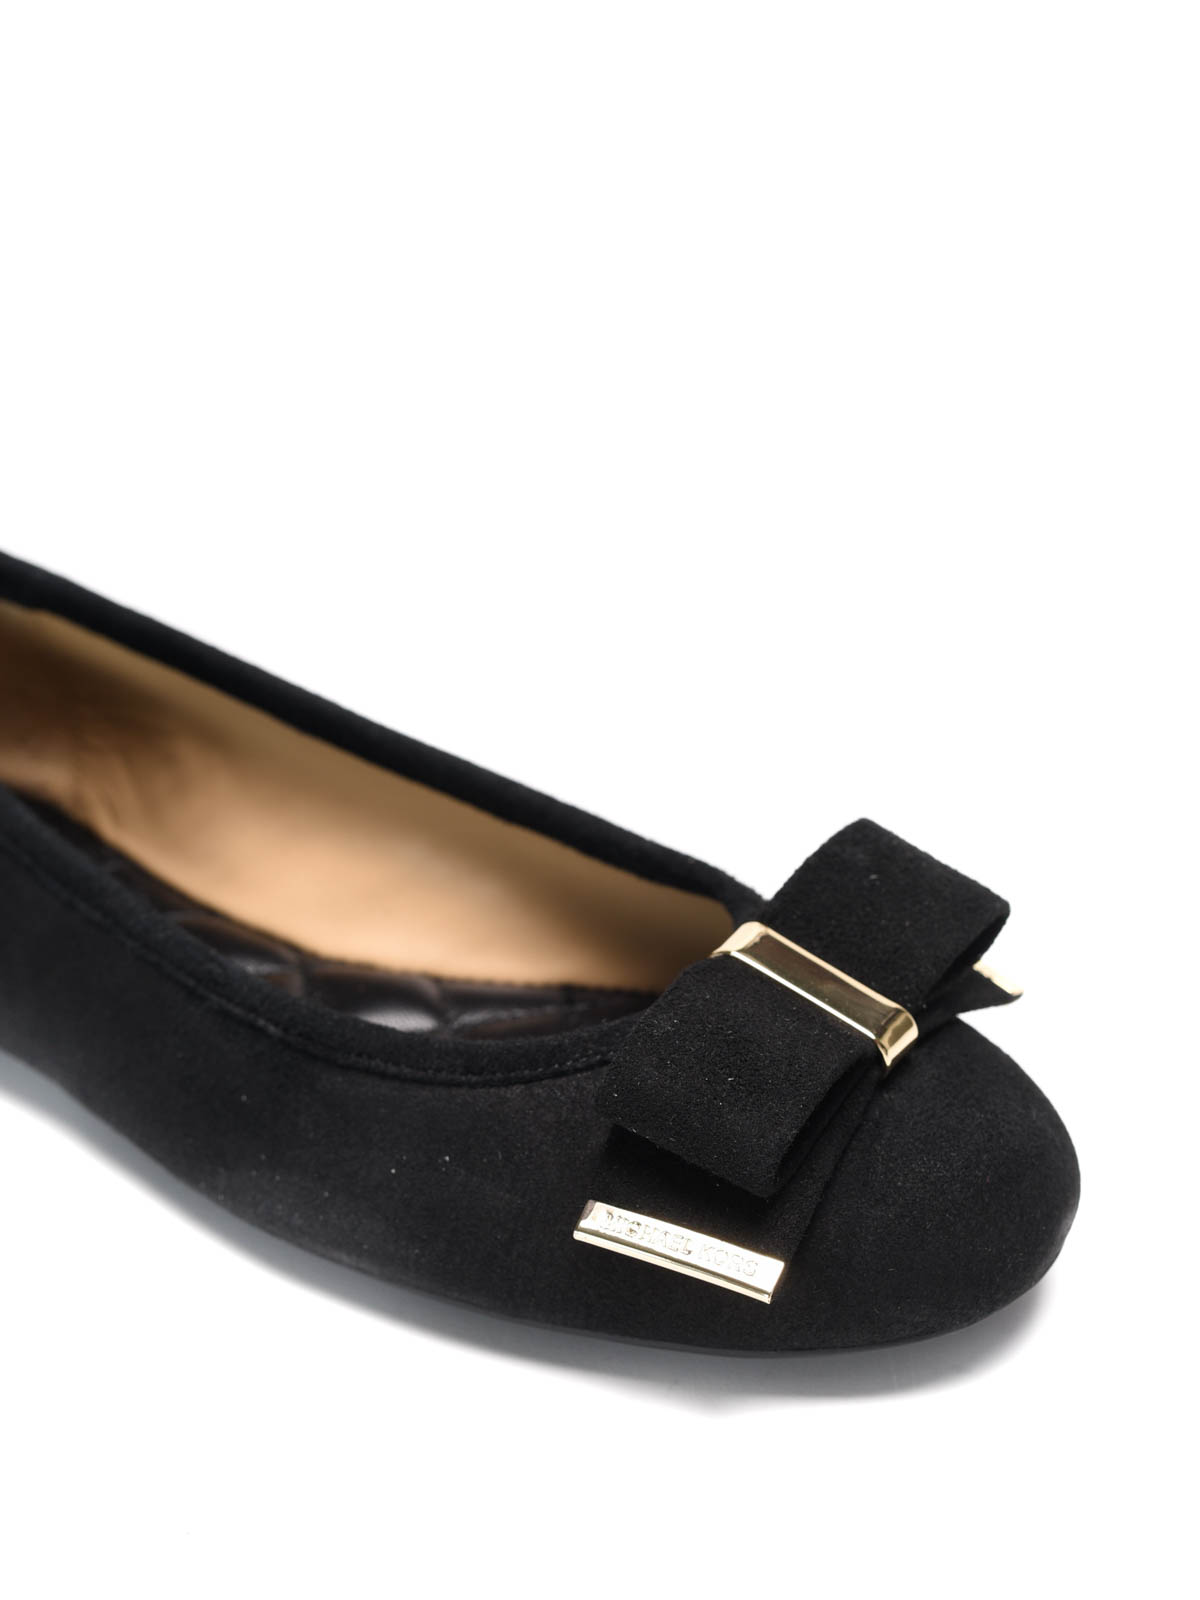 michael kors black flats with gold buckle